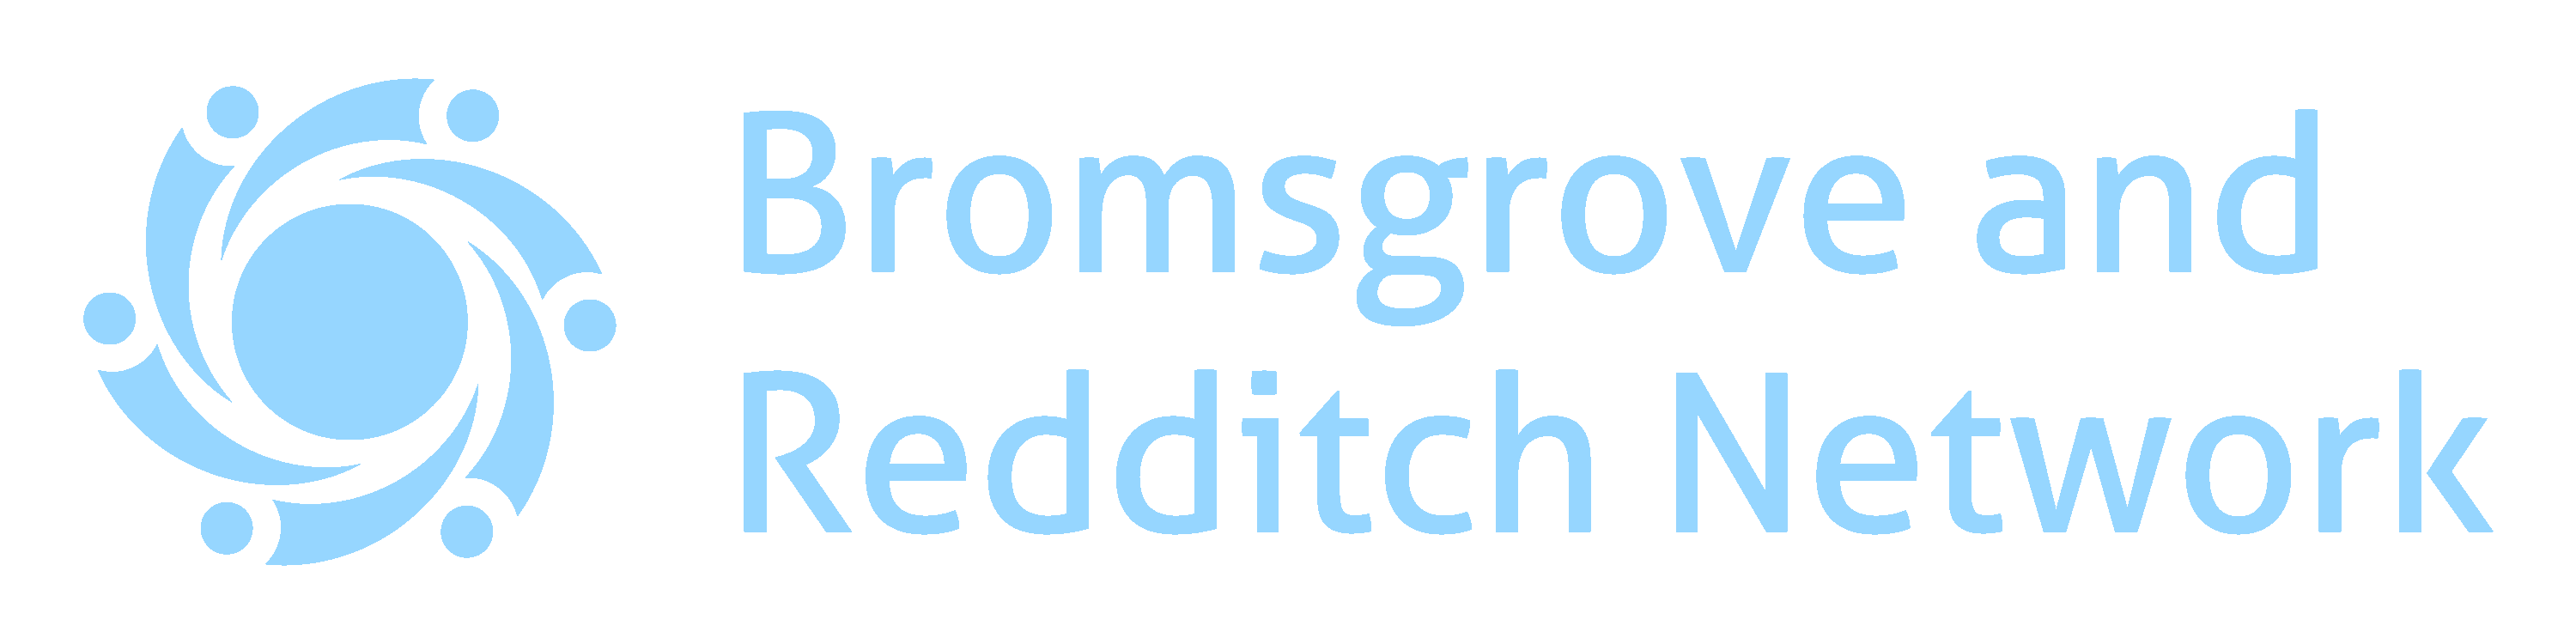 Bromsgrove and Redditch Network